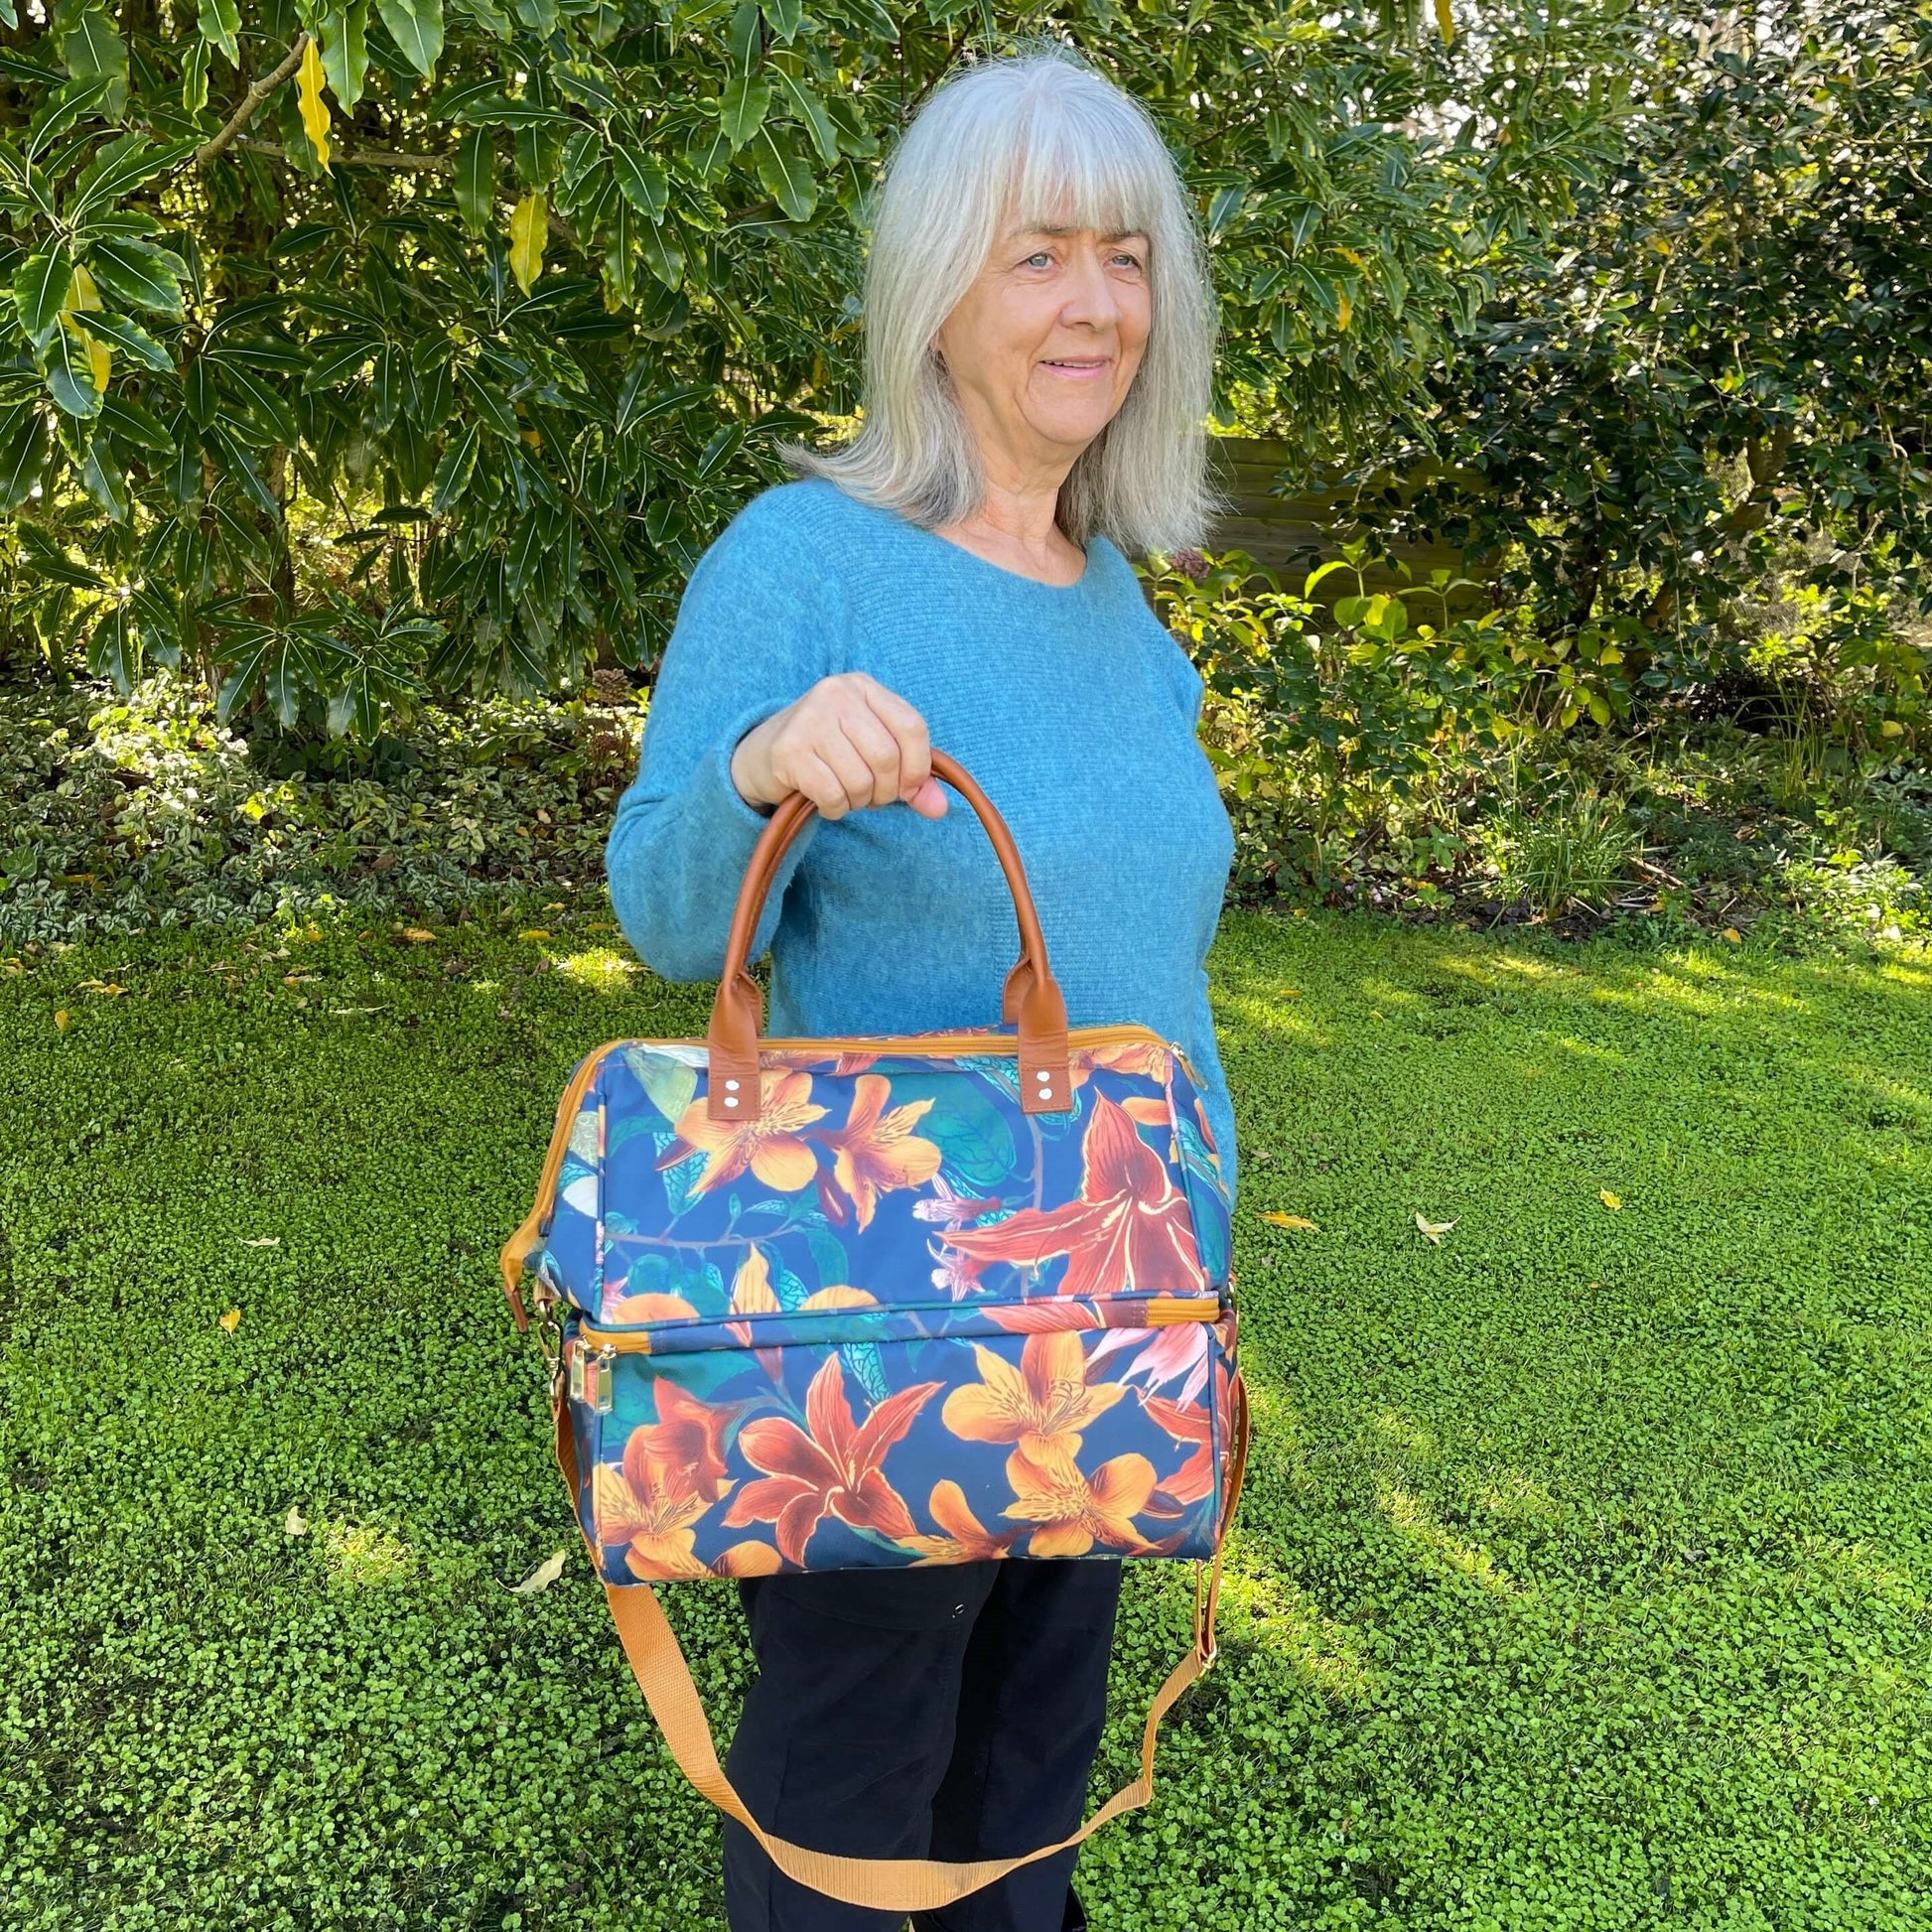 Women holding a large cooler bag which is a navy blue with orange flowers.